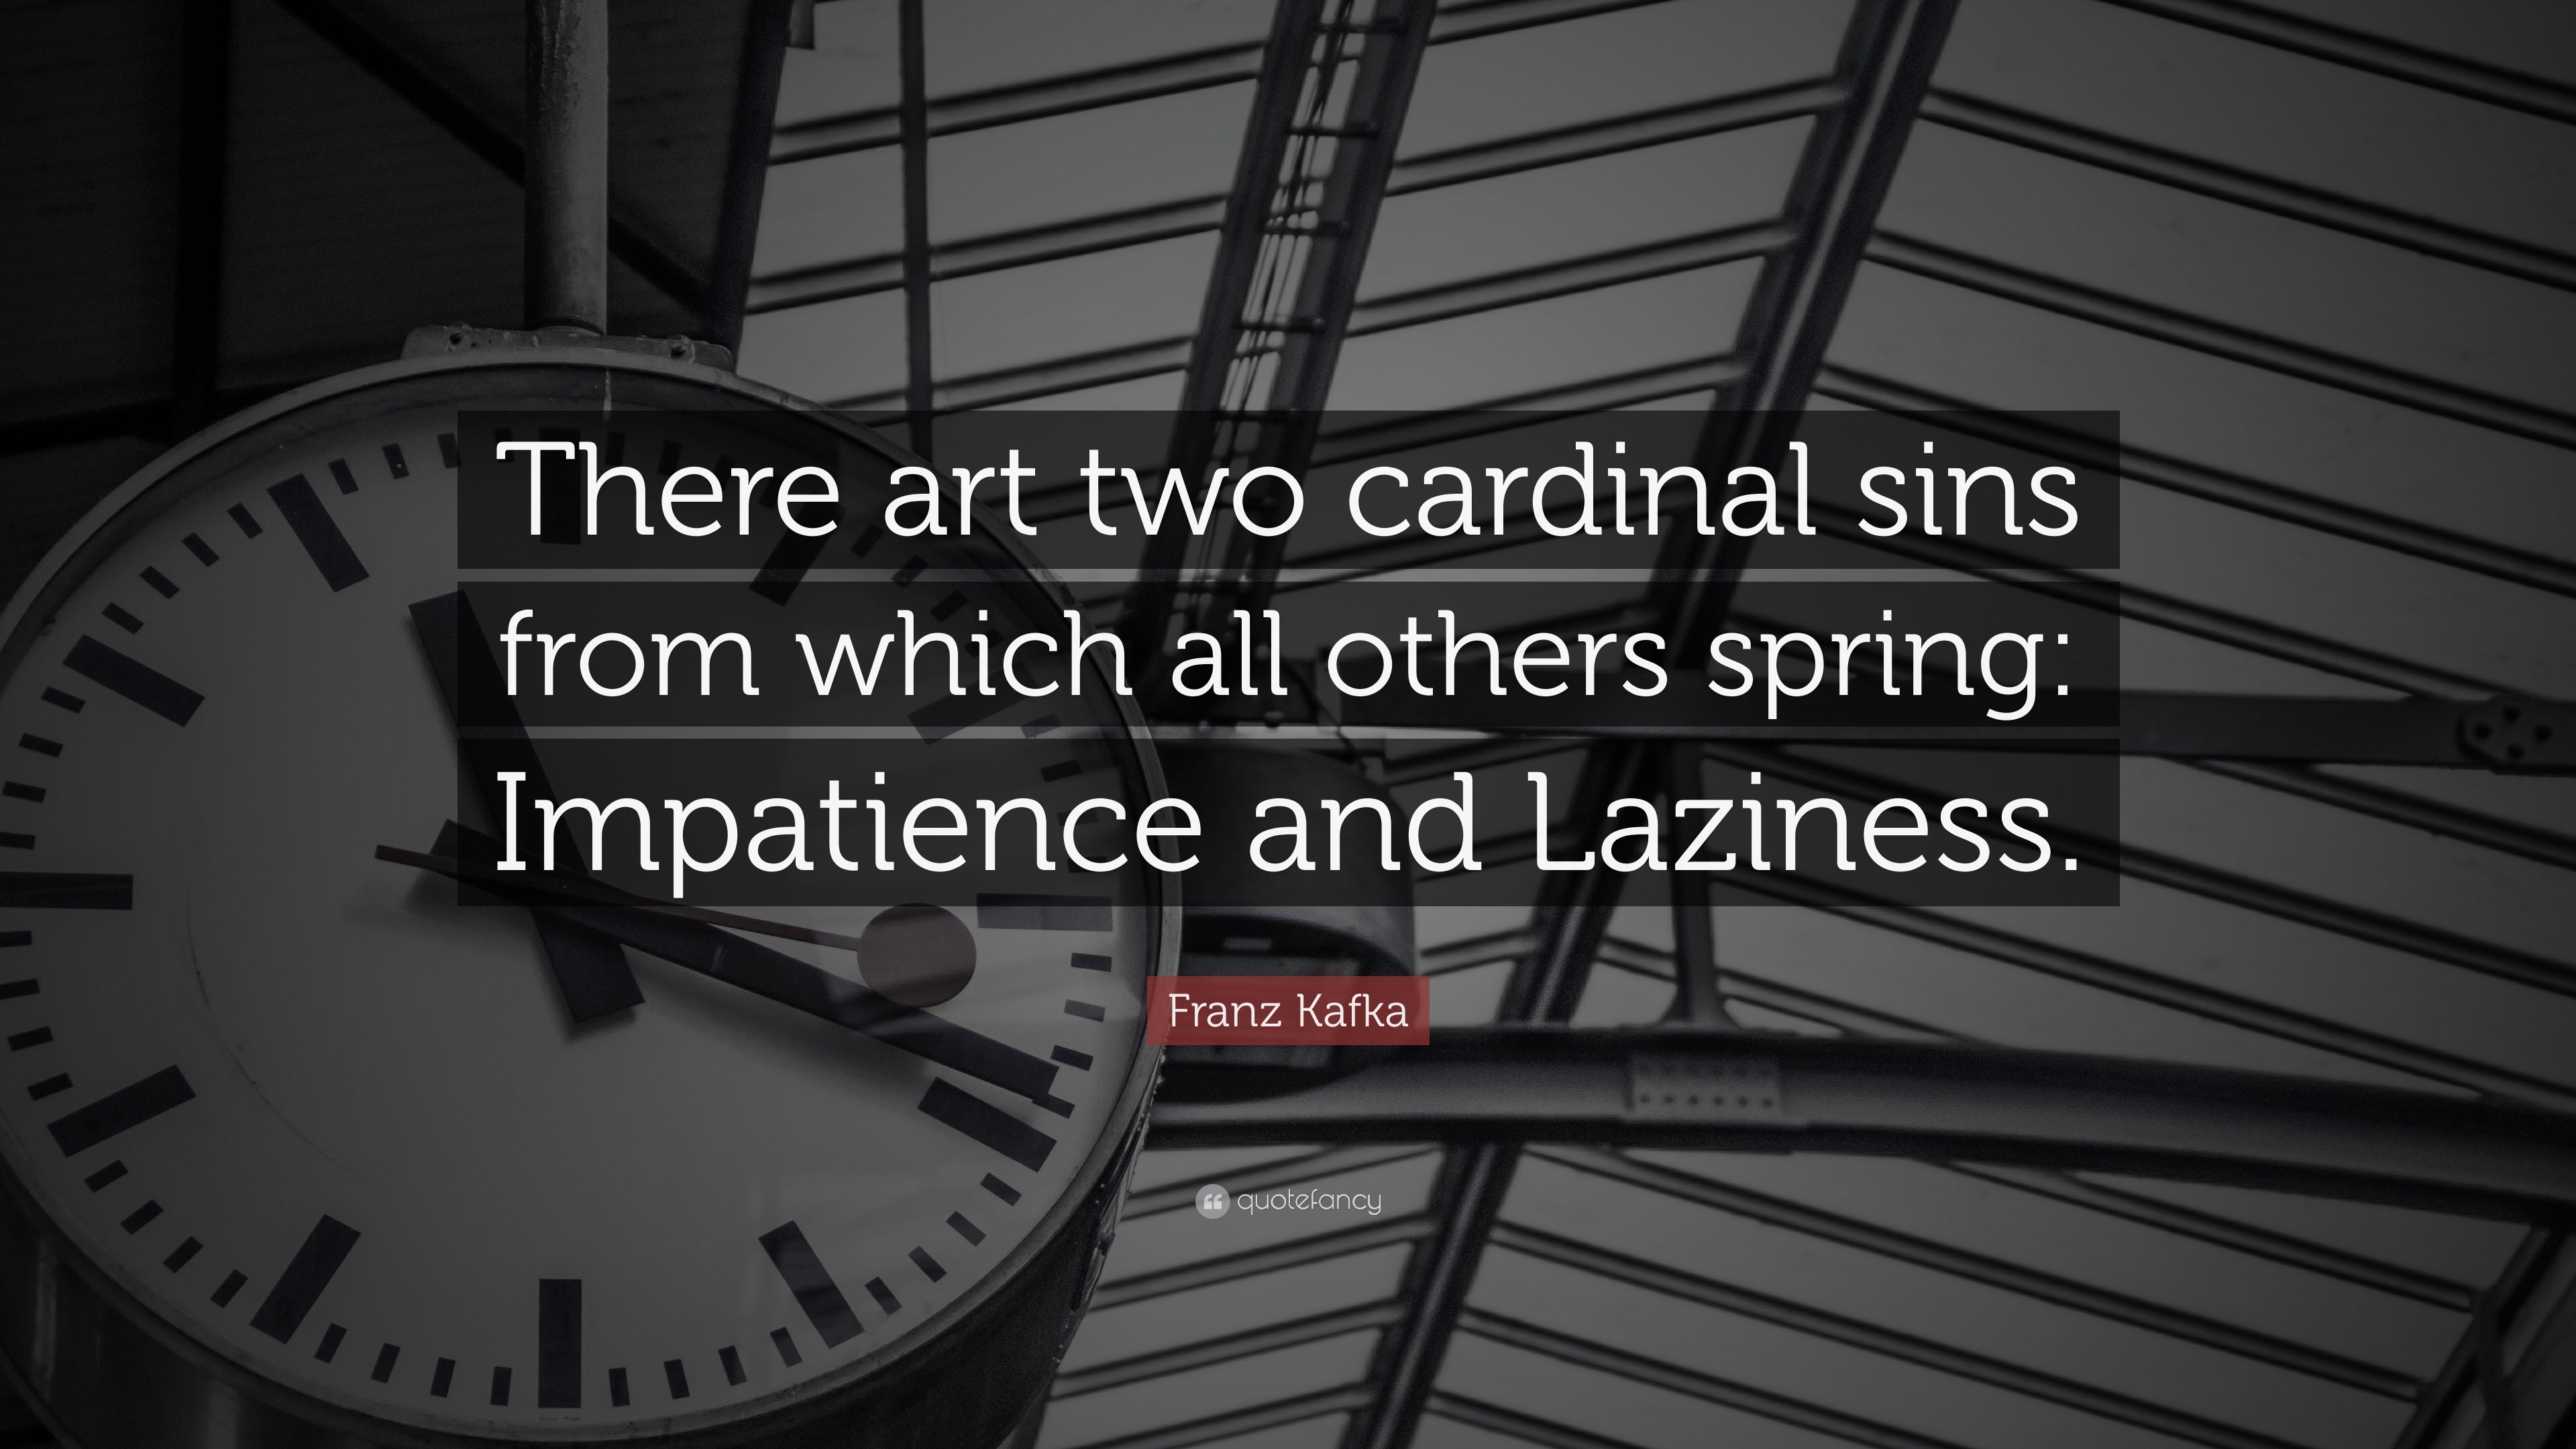 Patience Quotes “There art two cardinal sins from which all others spring Impatience